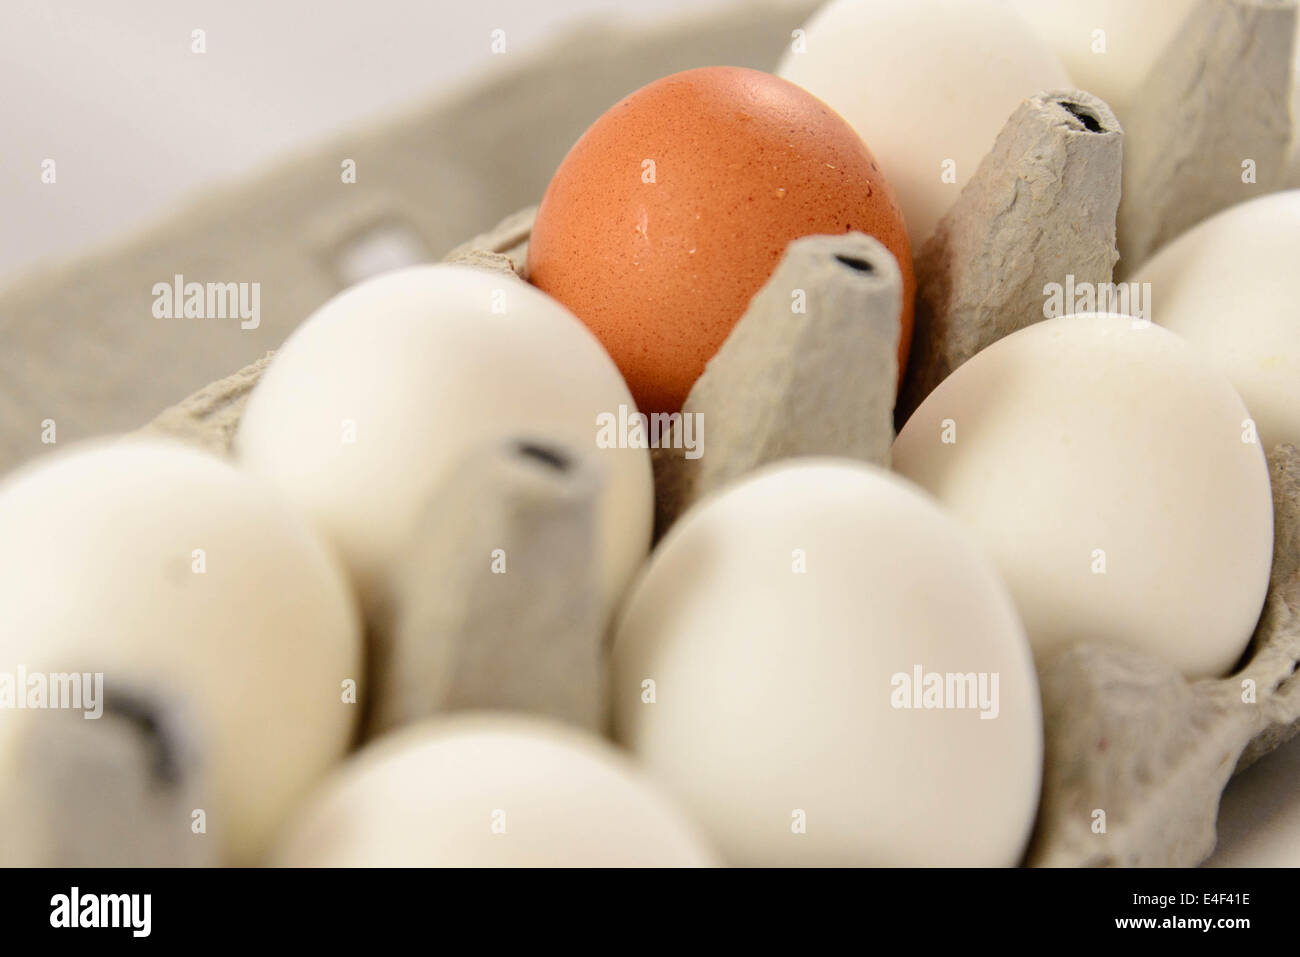 brown and white eggs in a carton Stock Photo